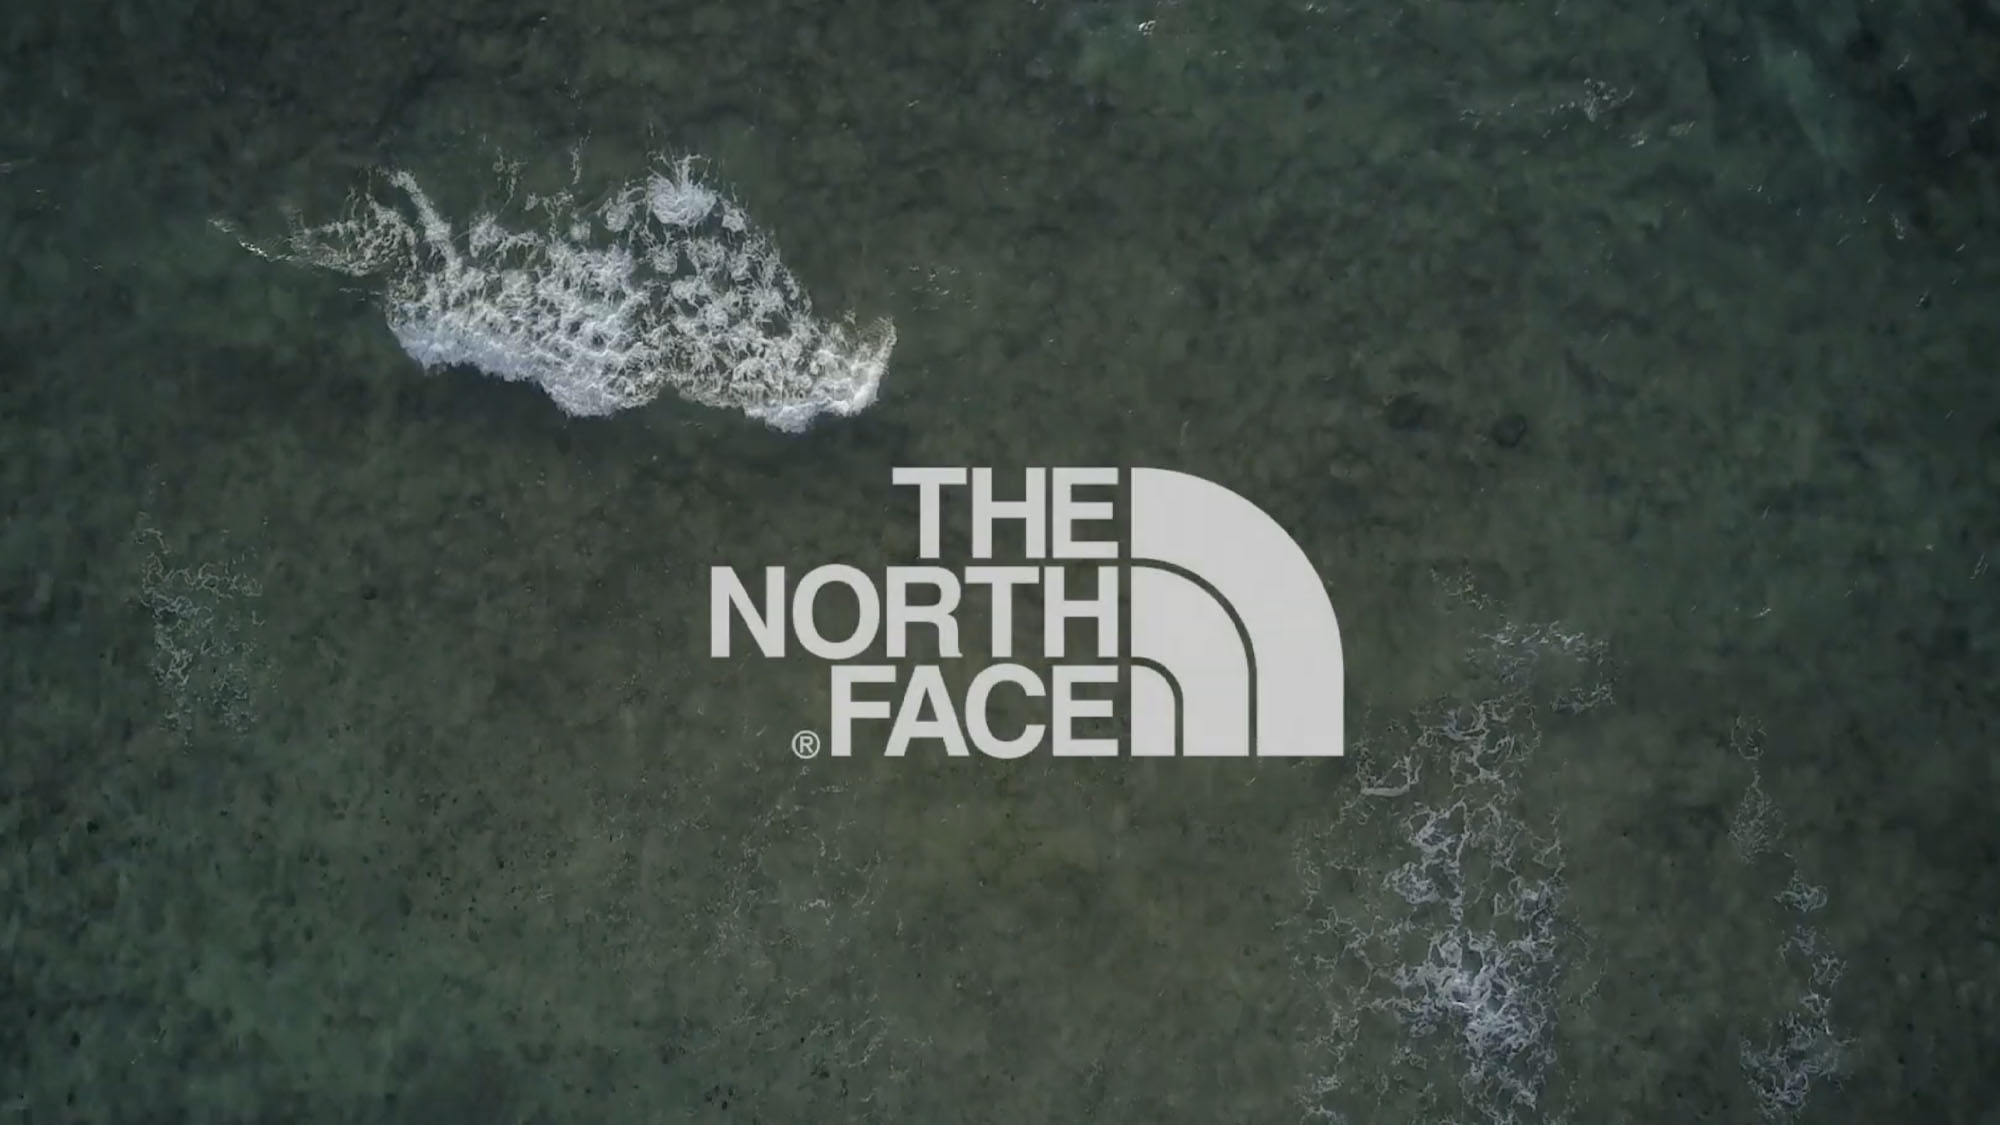 The North Face - Jose Jeuland Videographer Video Production Editing Singapore